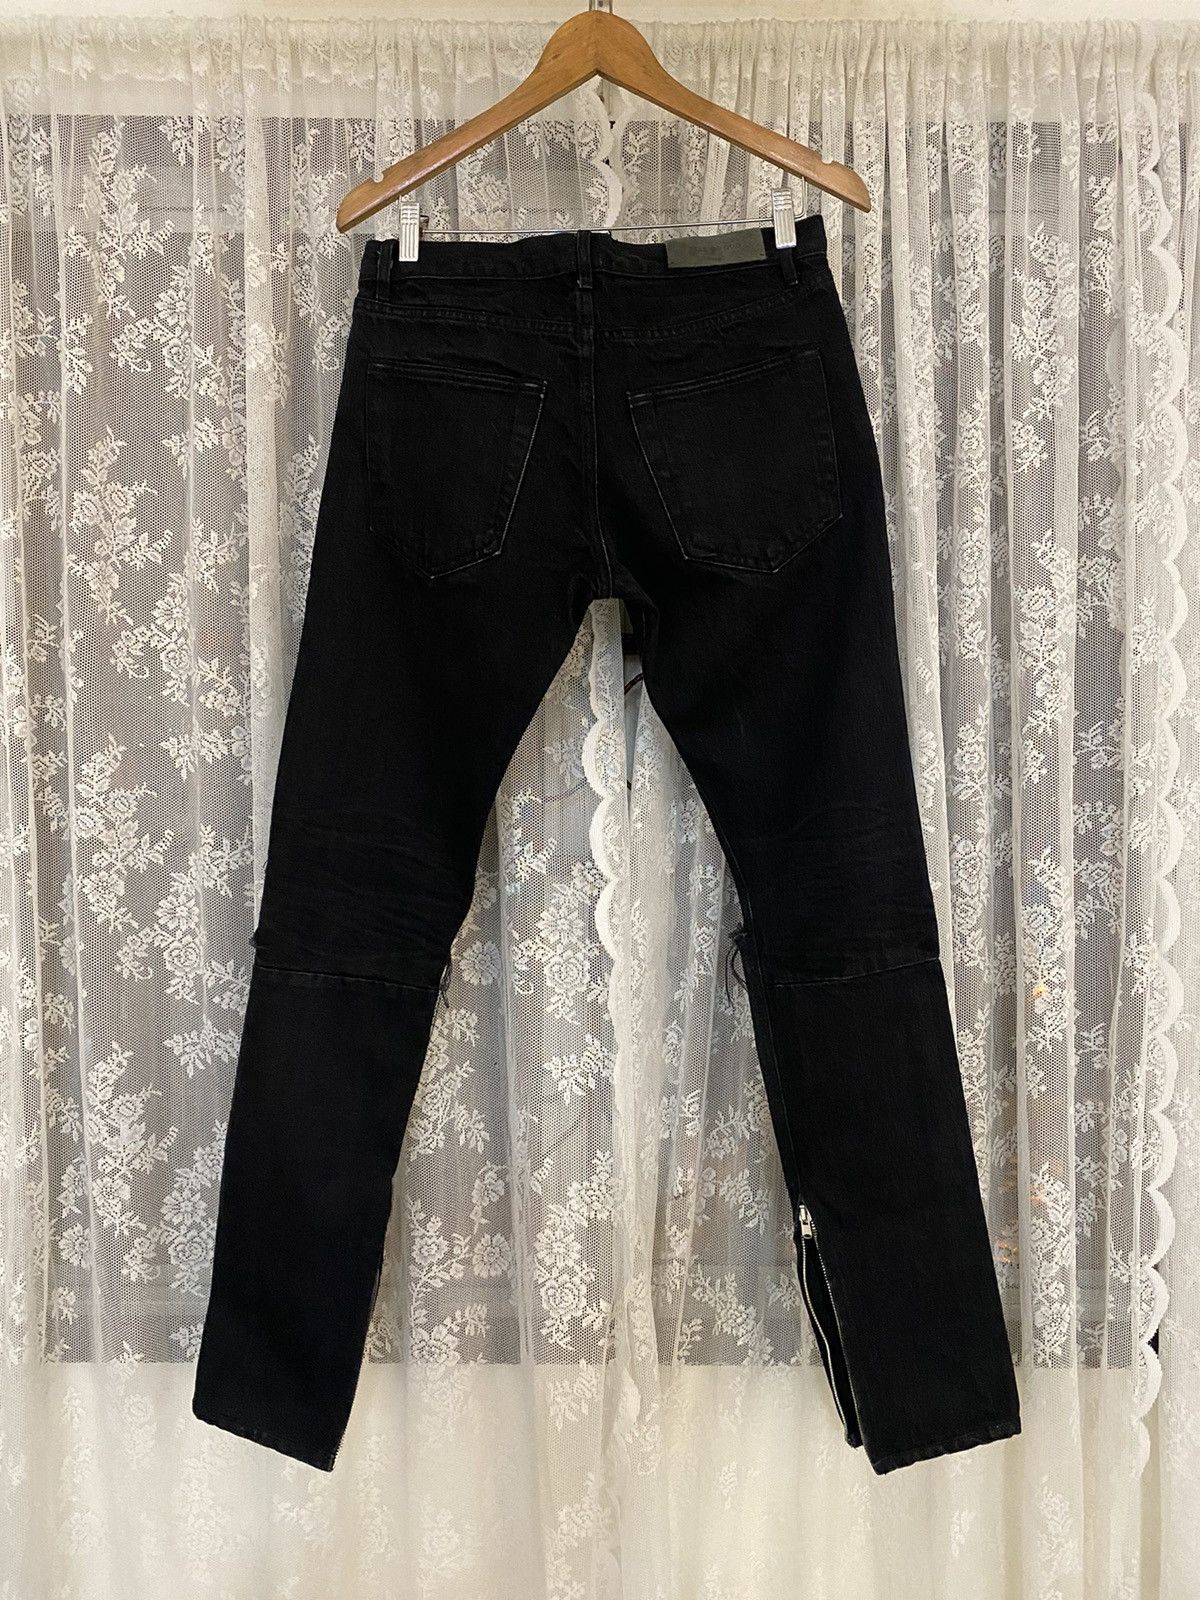 Fear of God Fourth Collection Distressed Denim Jeans - 2